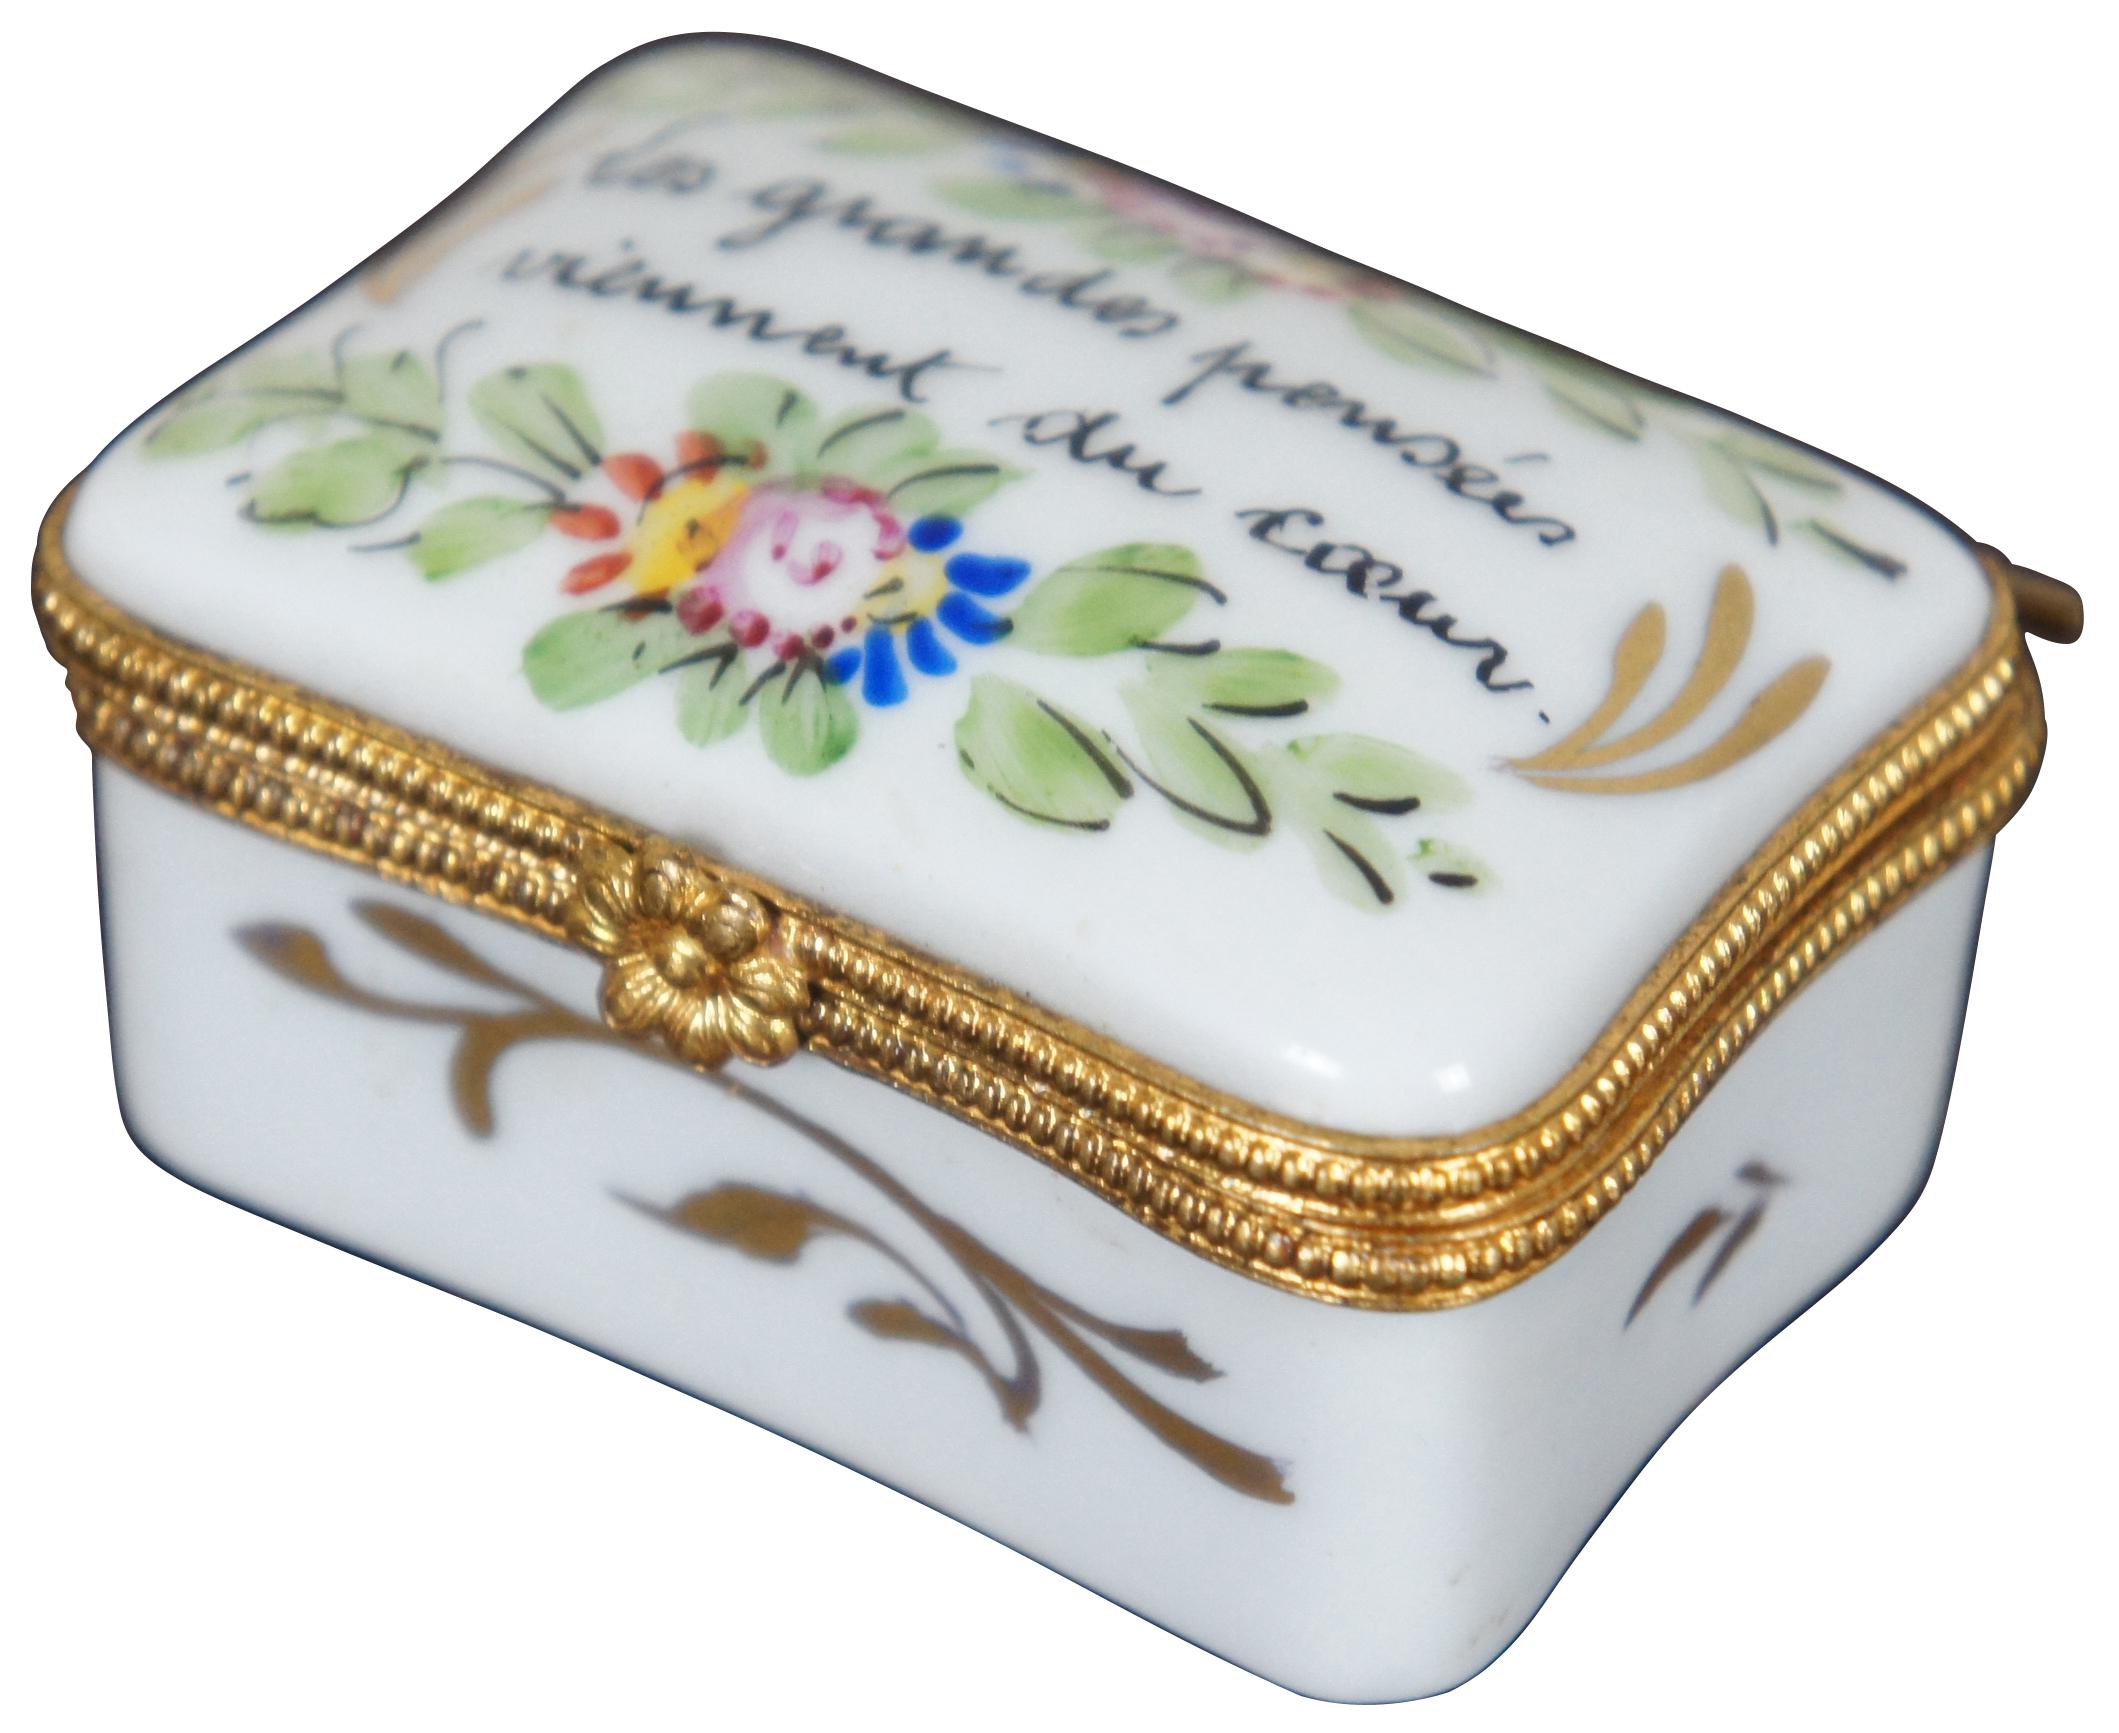 Vintage Limoges porcelain trinket or pill box hand painted with gold leaves, flowers, and the phrase “Les Grandes Penses Viennent du Coeur” (French for “Grand thoughts come from the heart”).
 